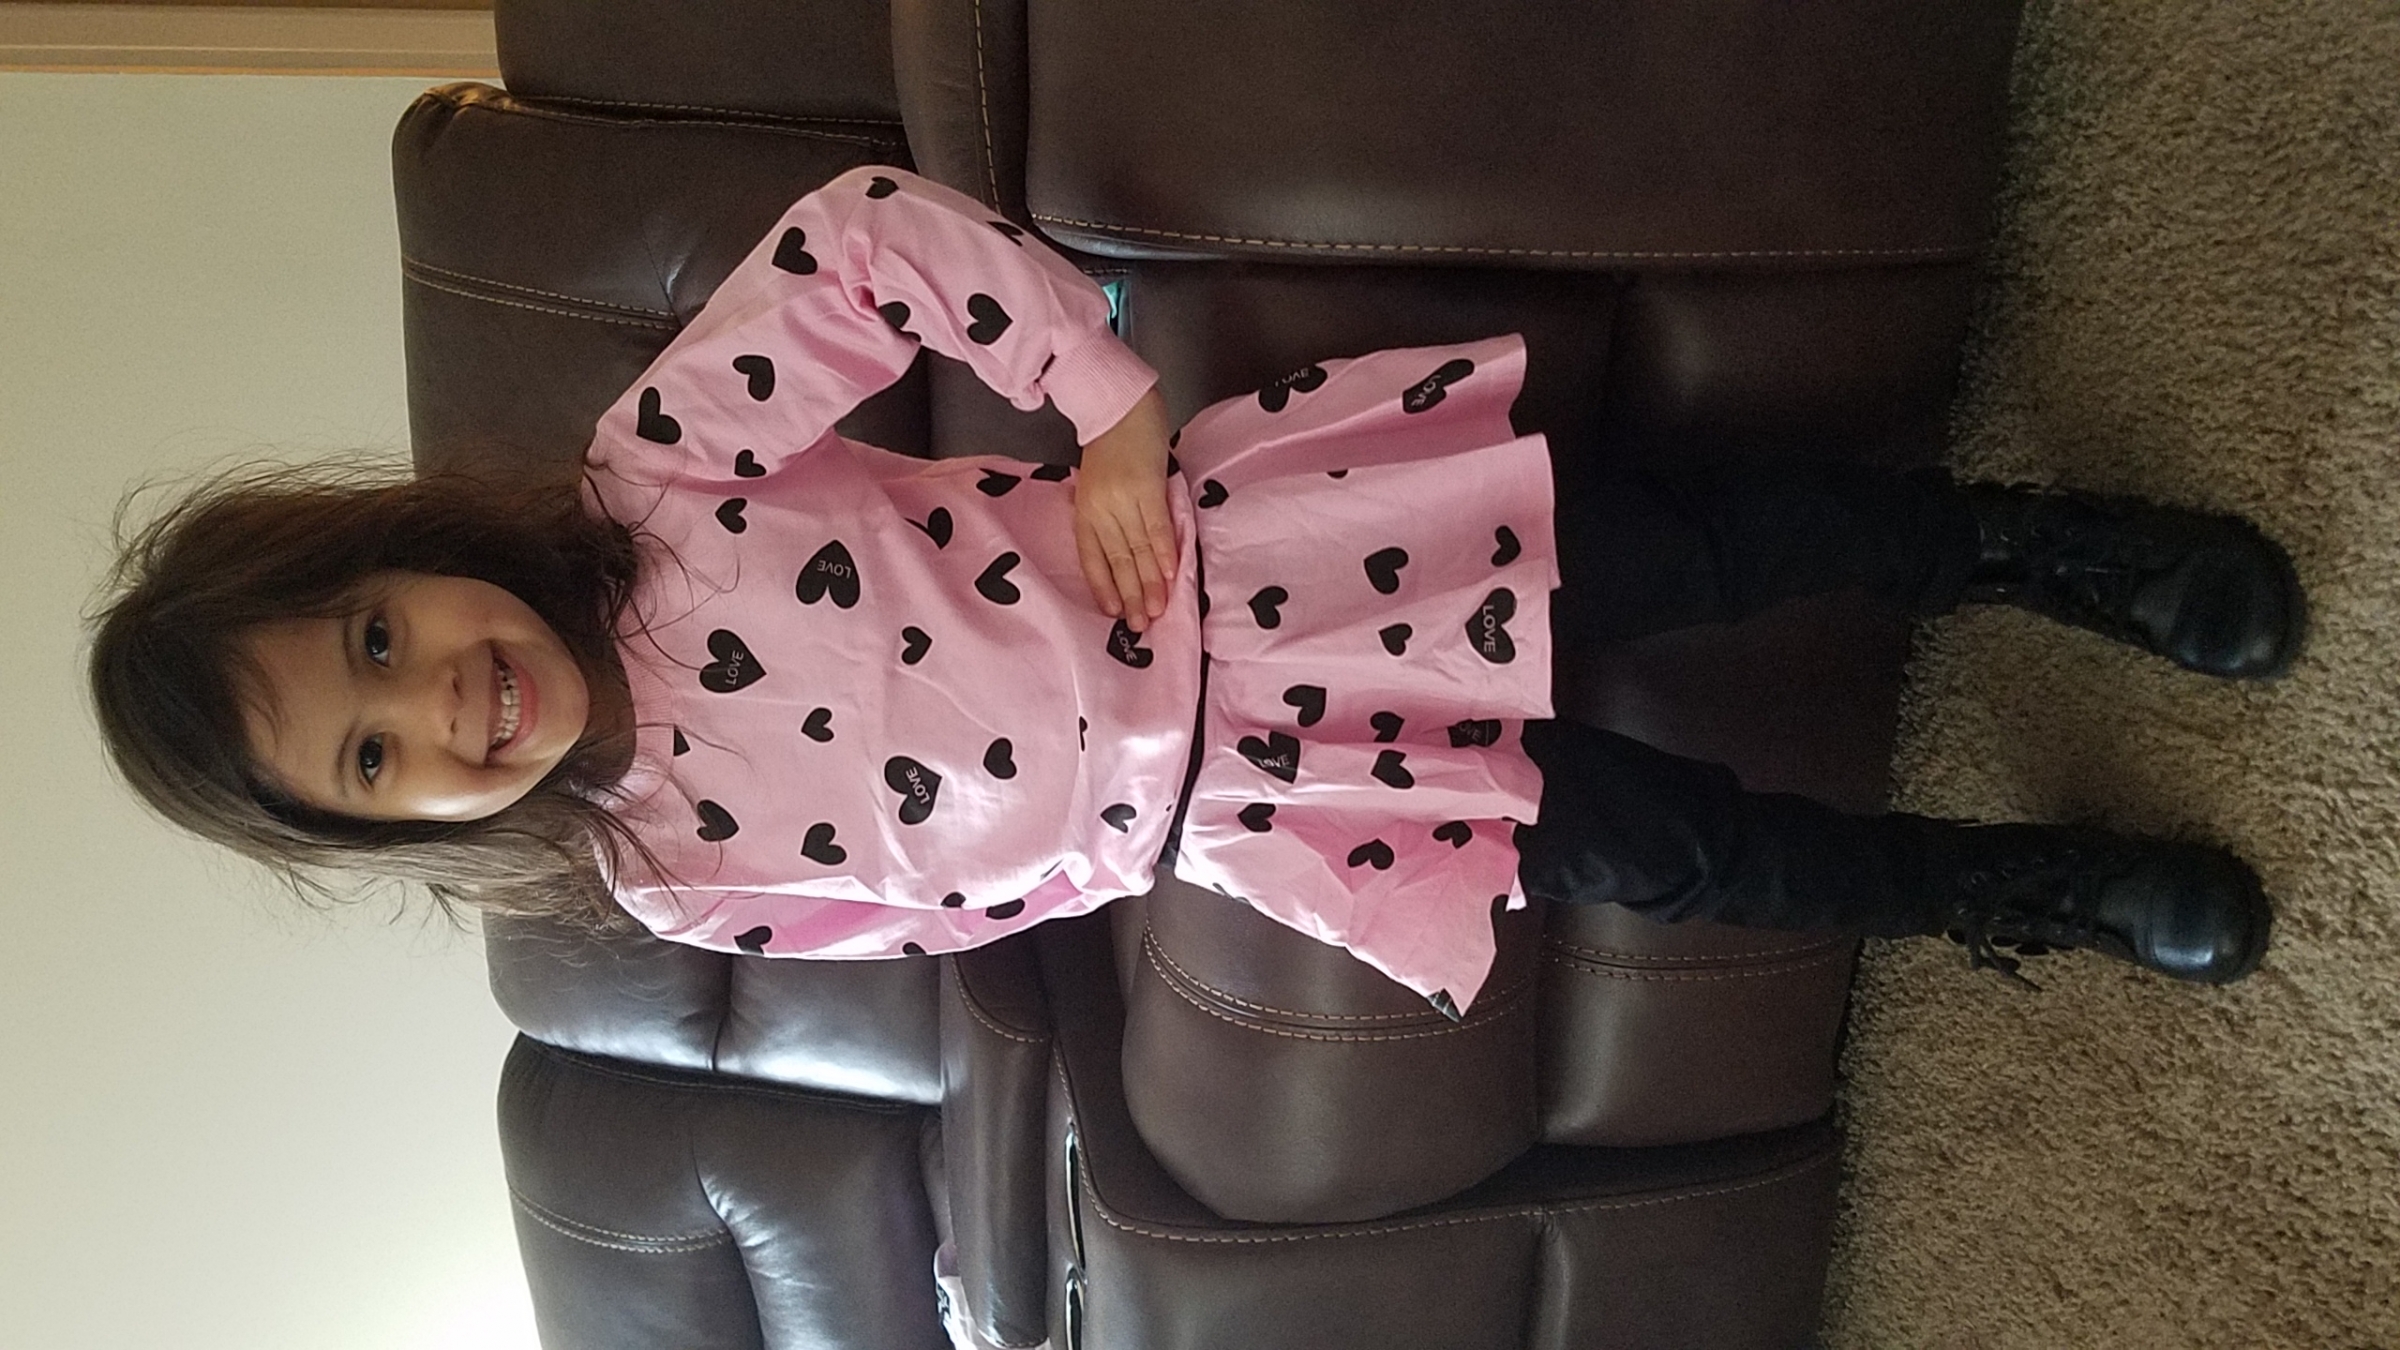 Looks and fits perfect on my daughter.